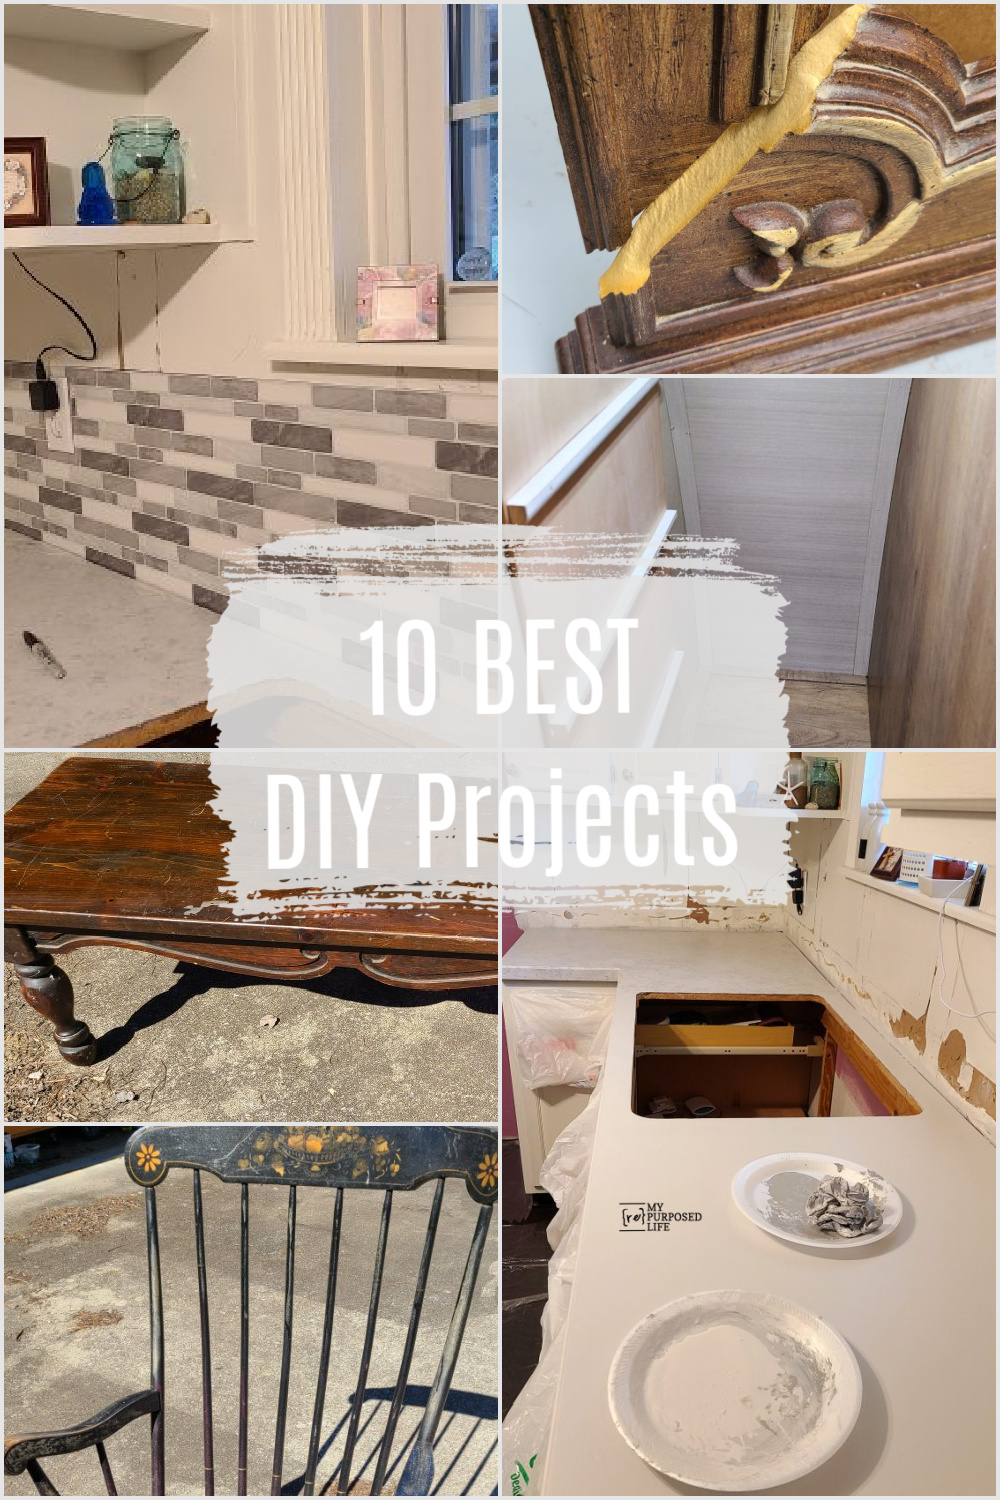 My Repurposed Life BEST DIY and reader's favorites from 2021. All the projects are timeless, not relevant to just a single year. Something for everyone! via @repurposedlife